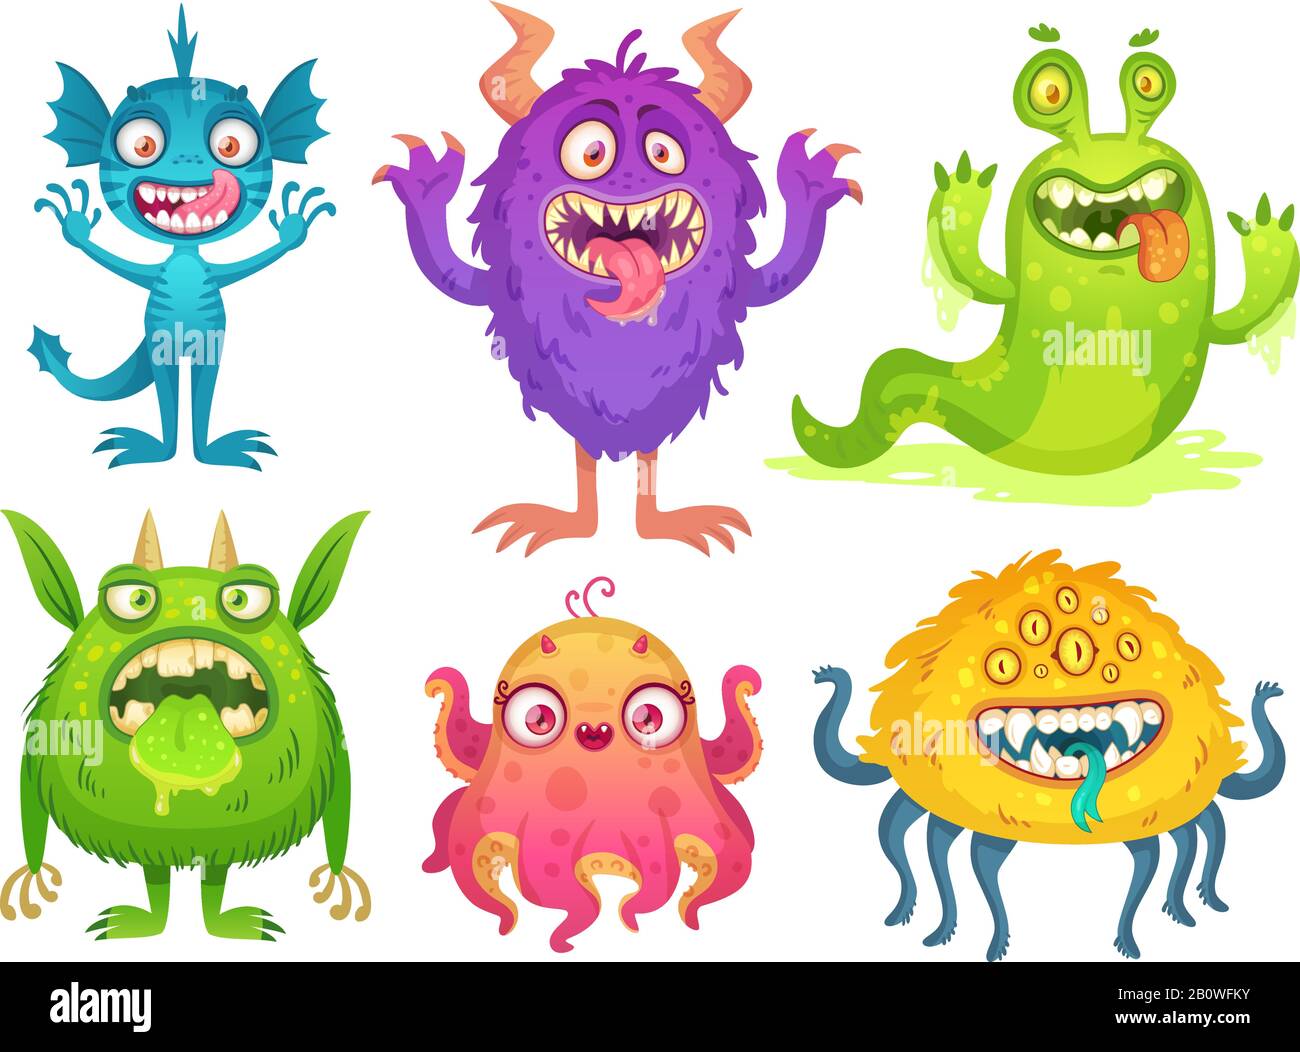 Cartoon monster mascot. Halloween funny monsters, bizarre gremlin with horn and furry creations. Cartoons character vector illustration Stock Vector